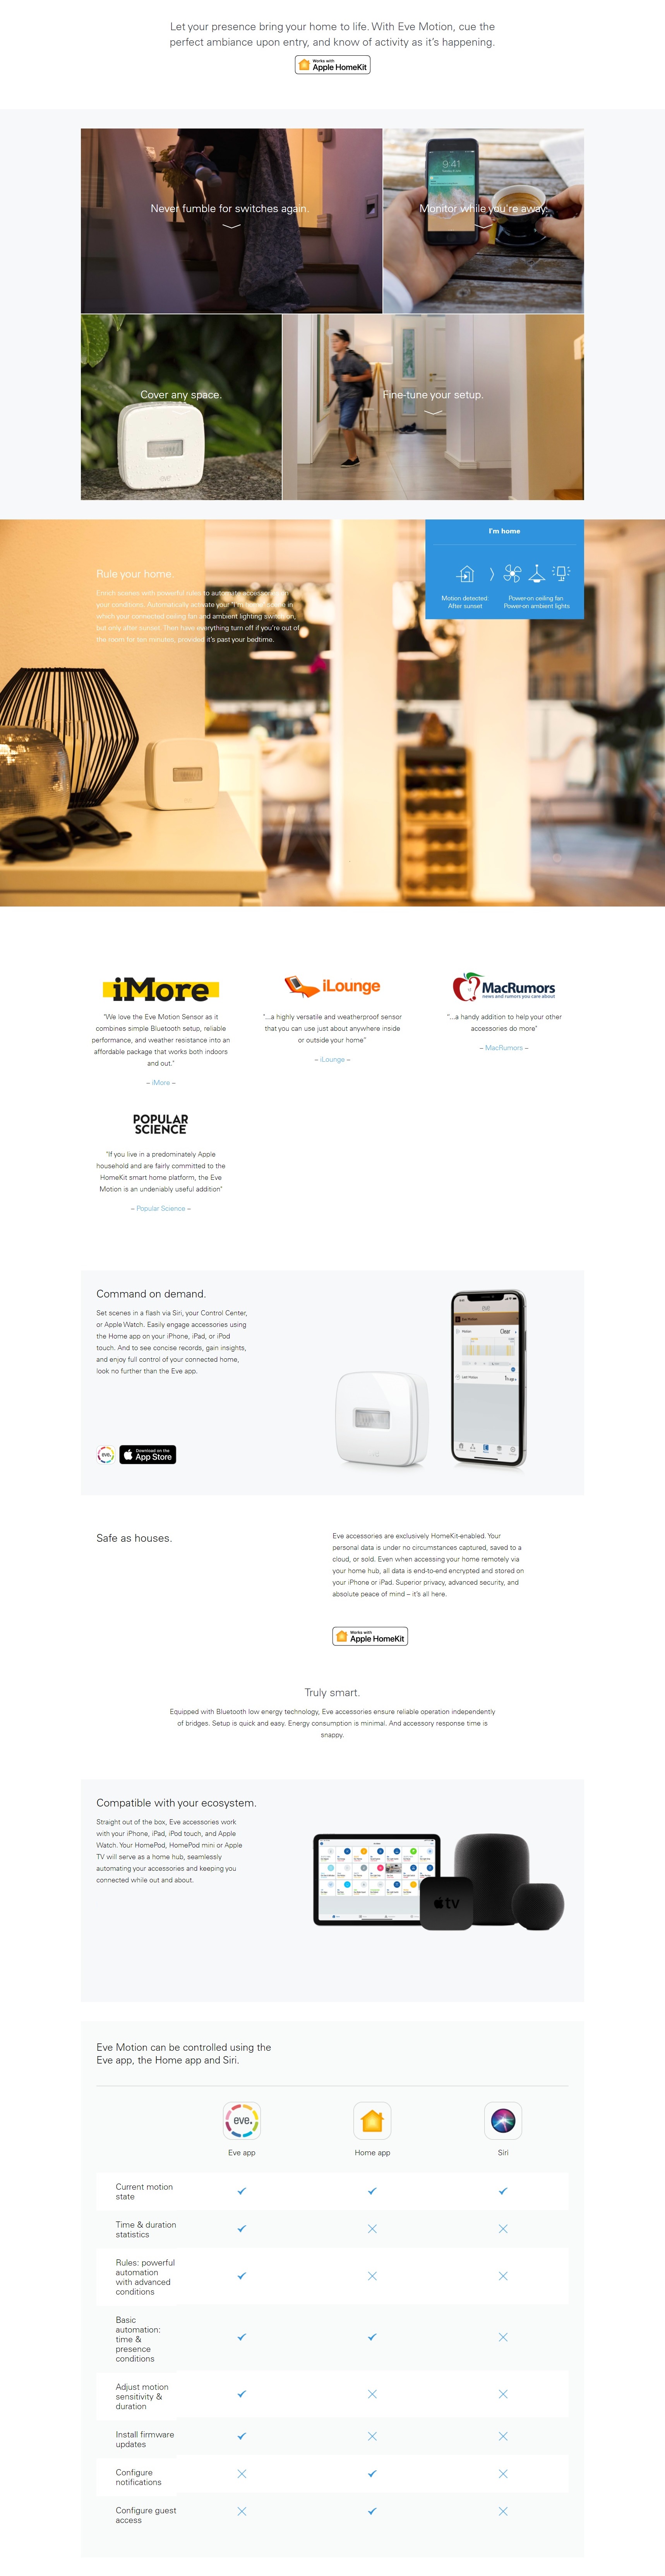 A large marketing image providing additional information about the product Eve Motion Wireless Motion Sensor - Additional alt info not provided